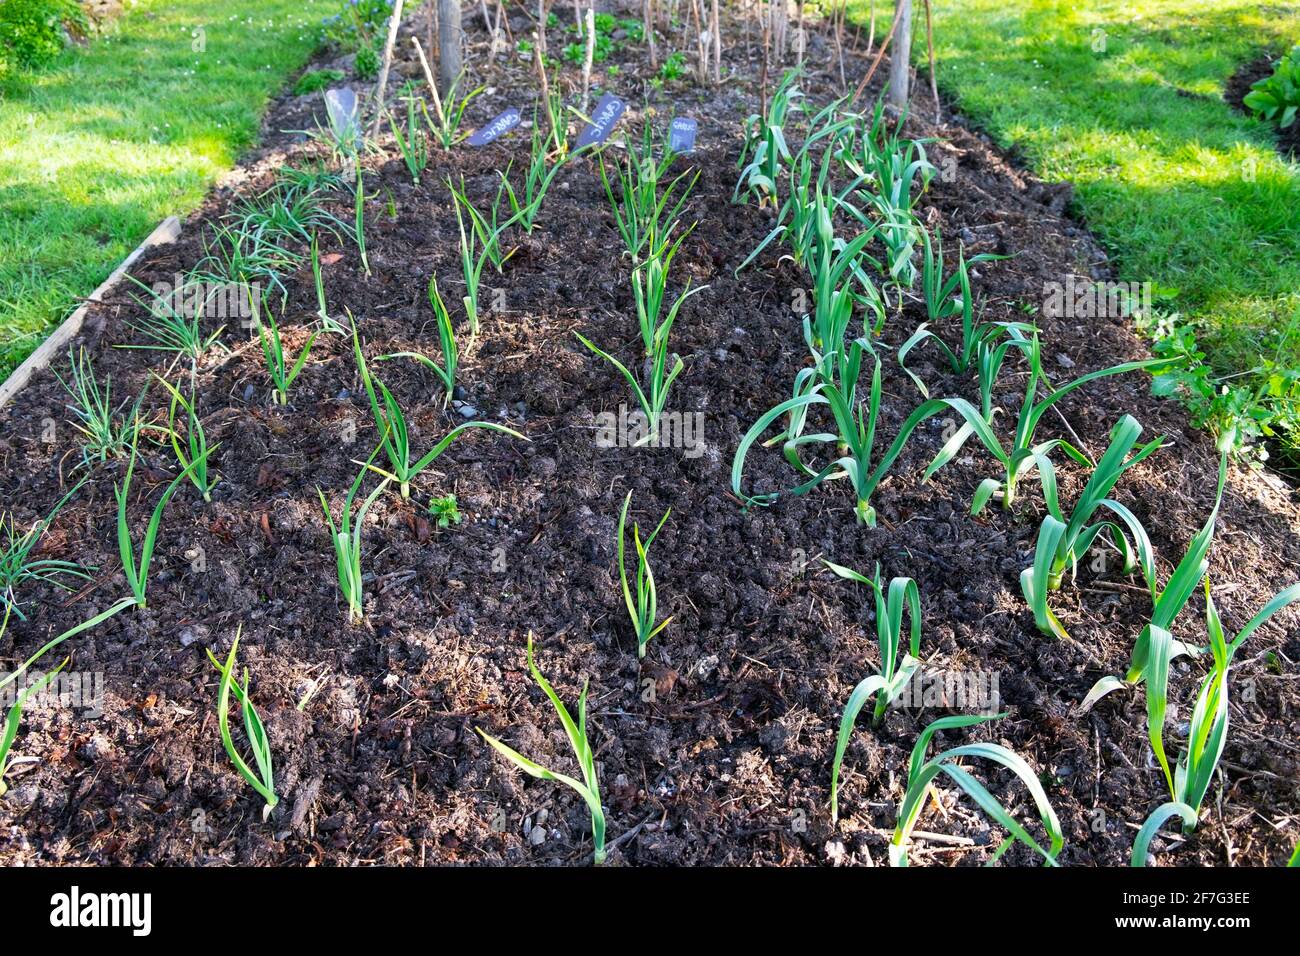 Garlic, elephant garlic, onions growing in vegetable bed with compost mulch in spring April garden in Carmarthenshire West Wales UK  KATHY DEWITT Stock Photo